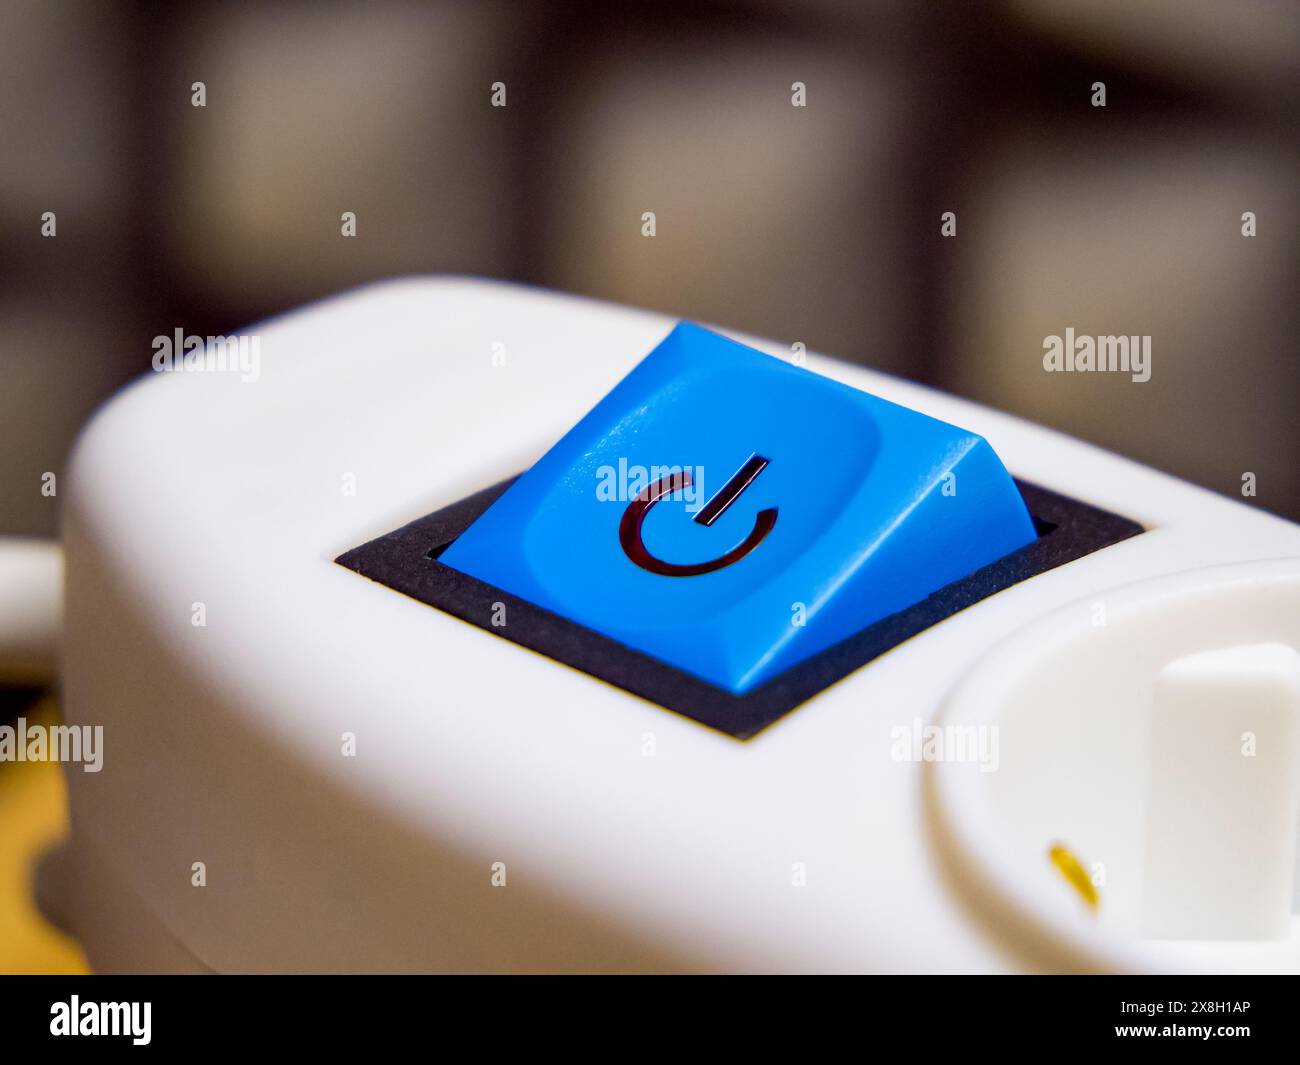 Blue power button with a symbol on white machinery, representing action and response. Stock Photo